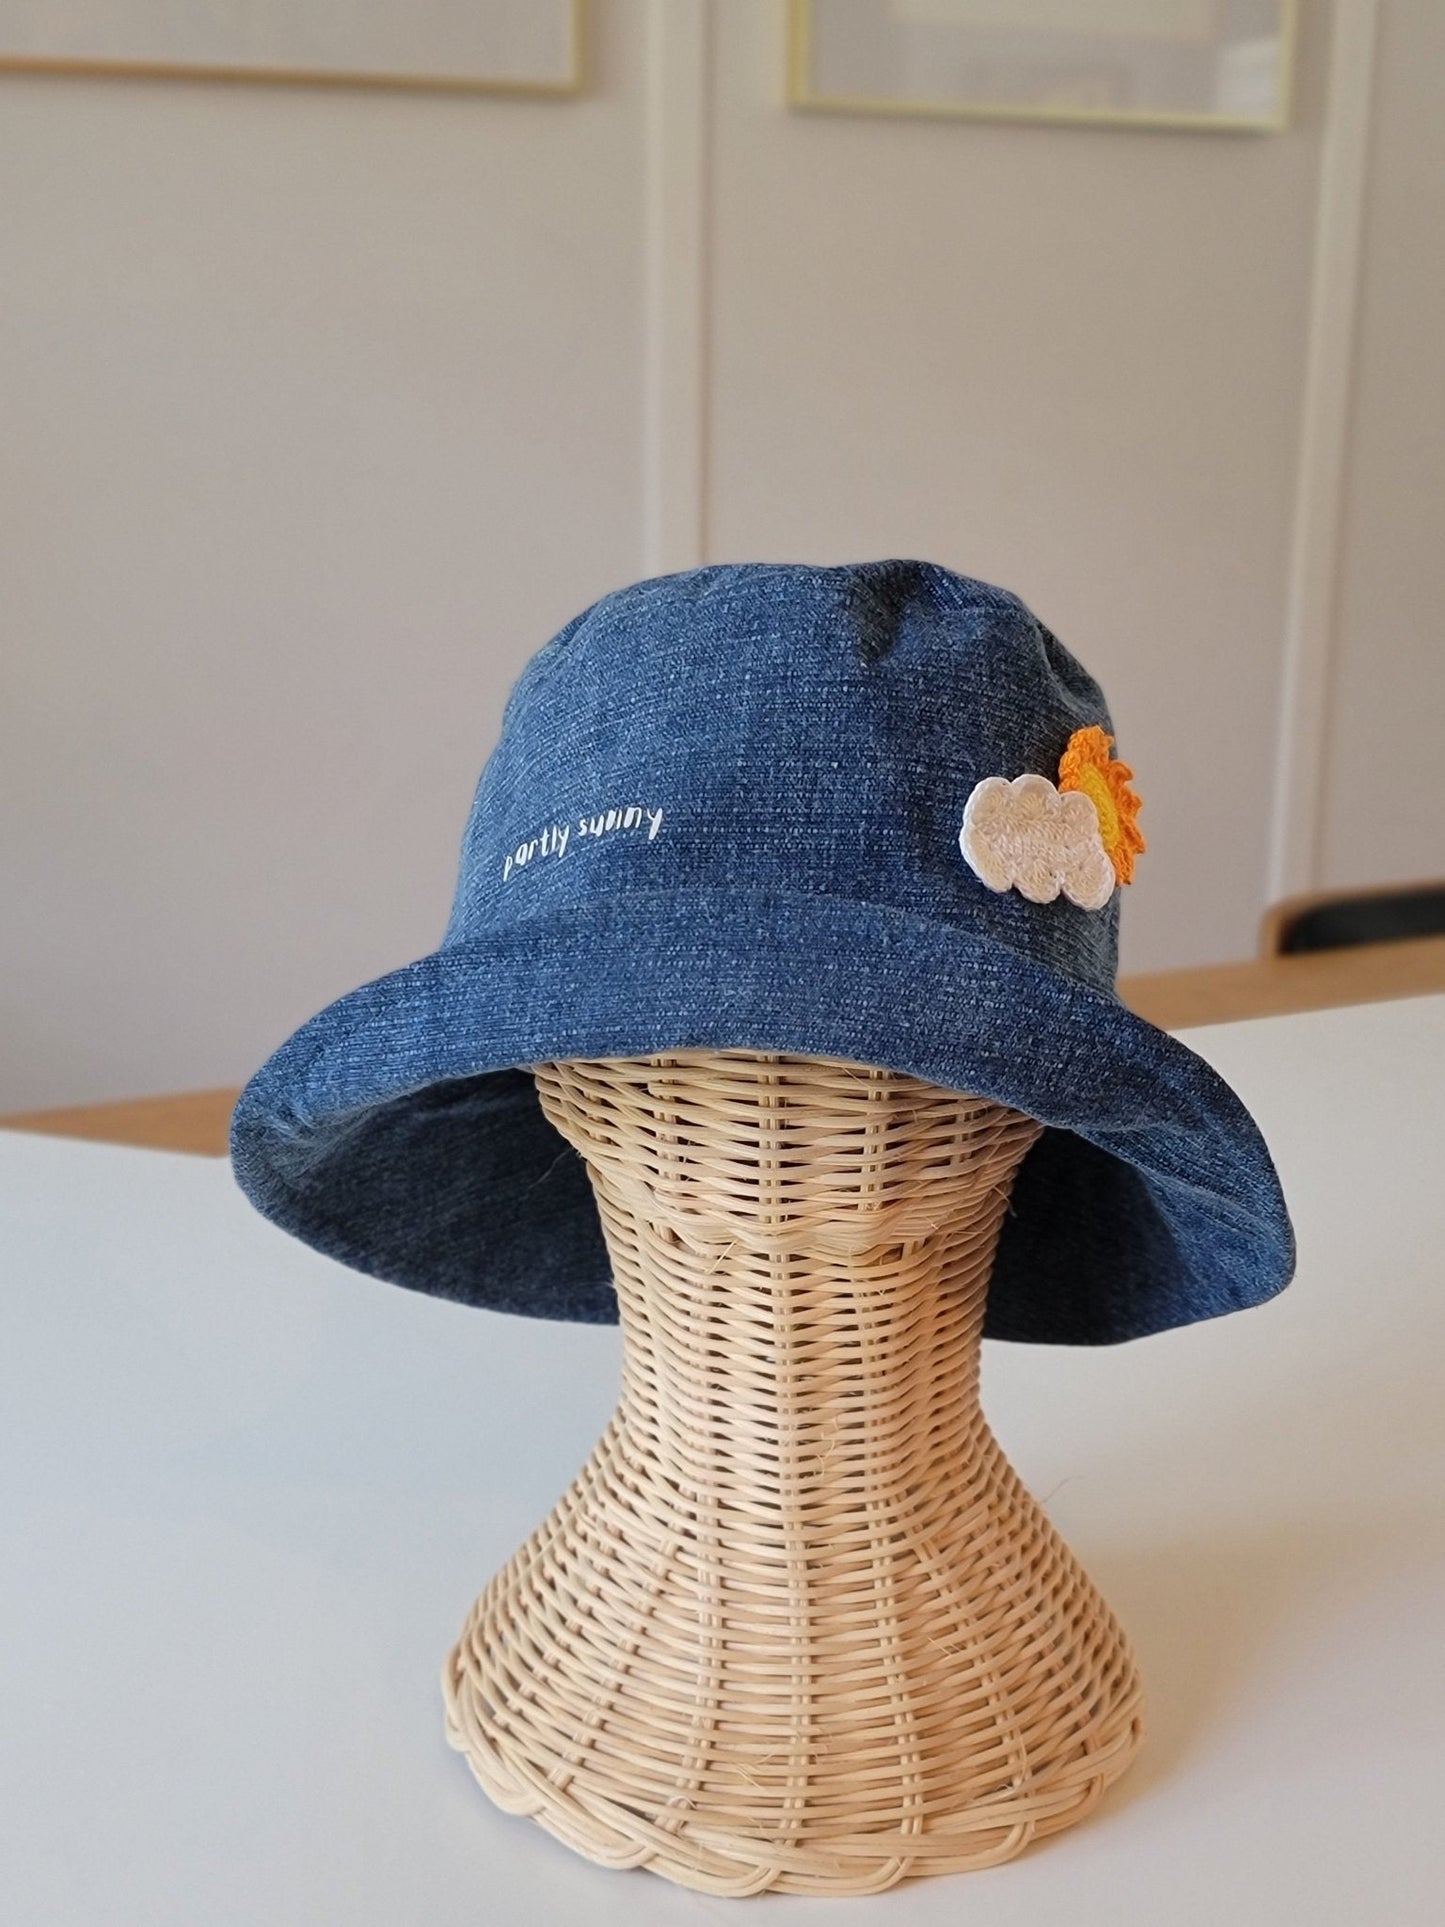 Bucket hat-Partly sunny-1